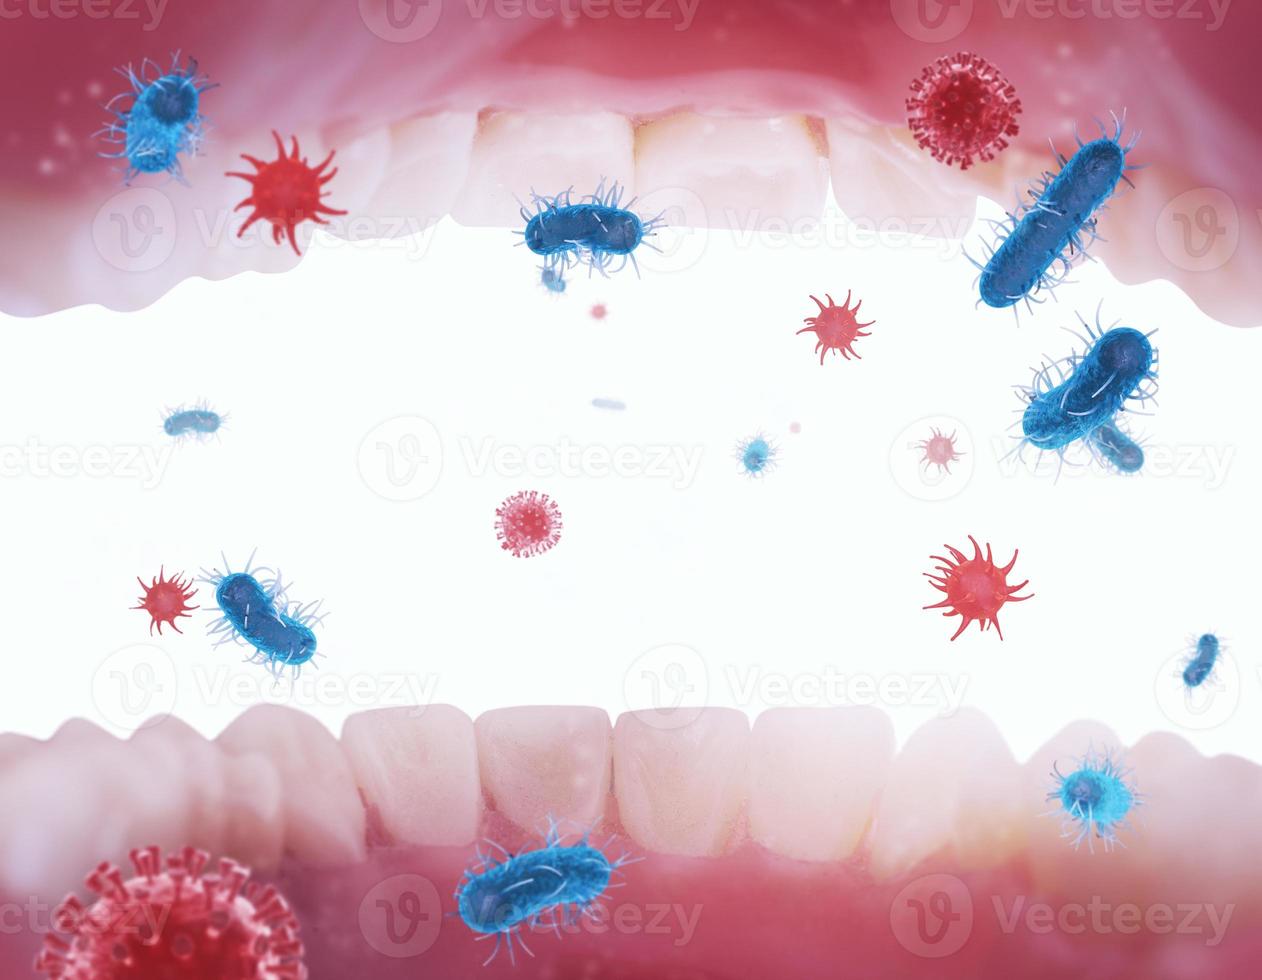 Viral infection concept with viruses and bacteria that infect people through the respiratory tract photo